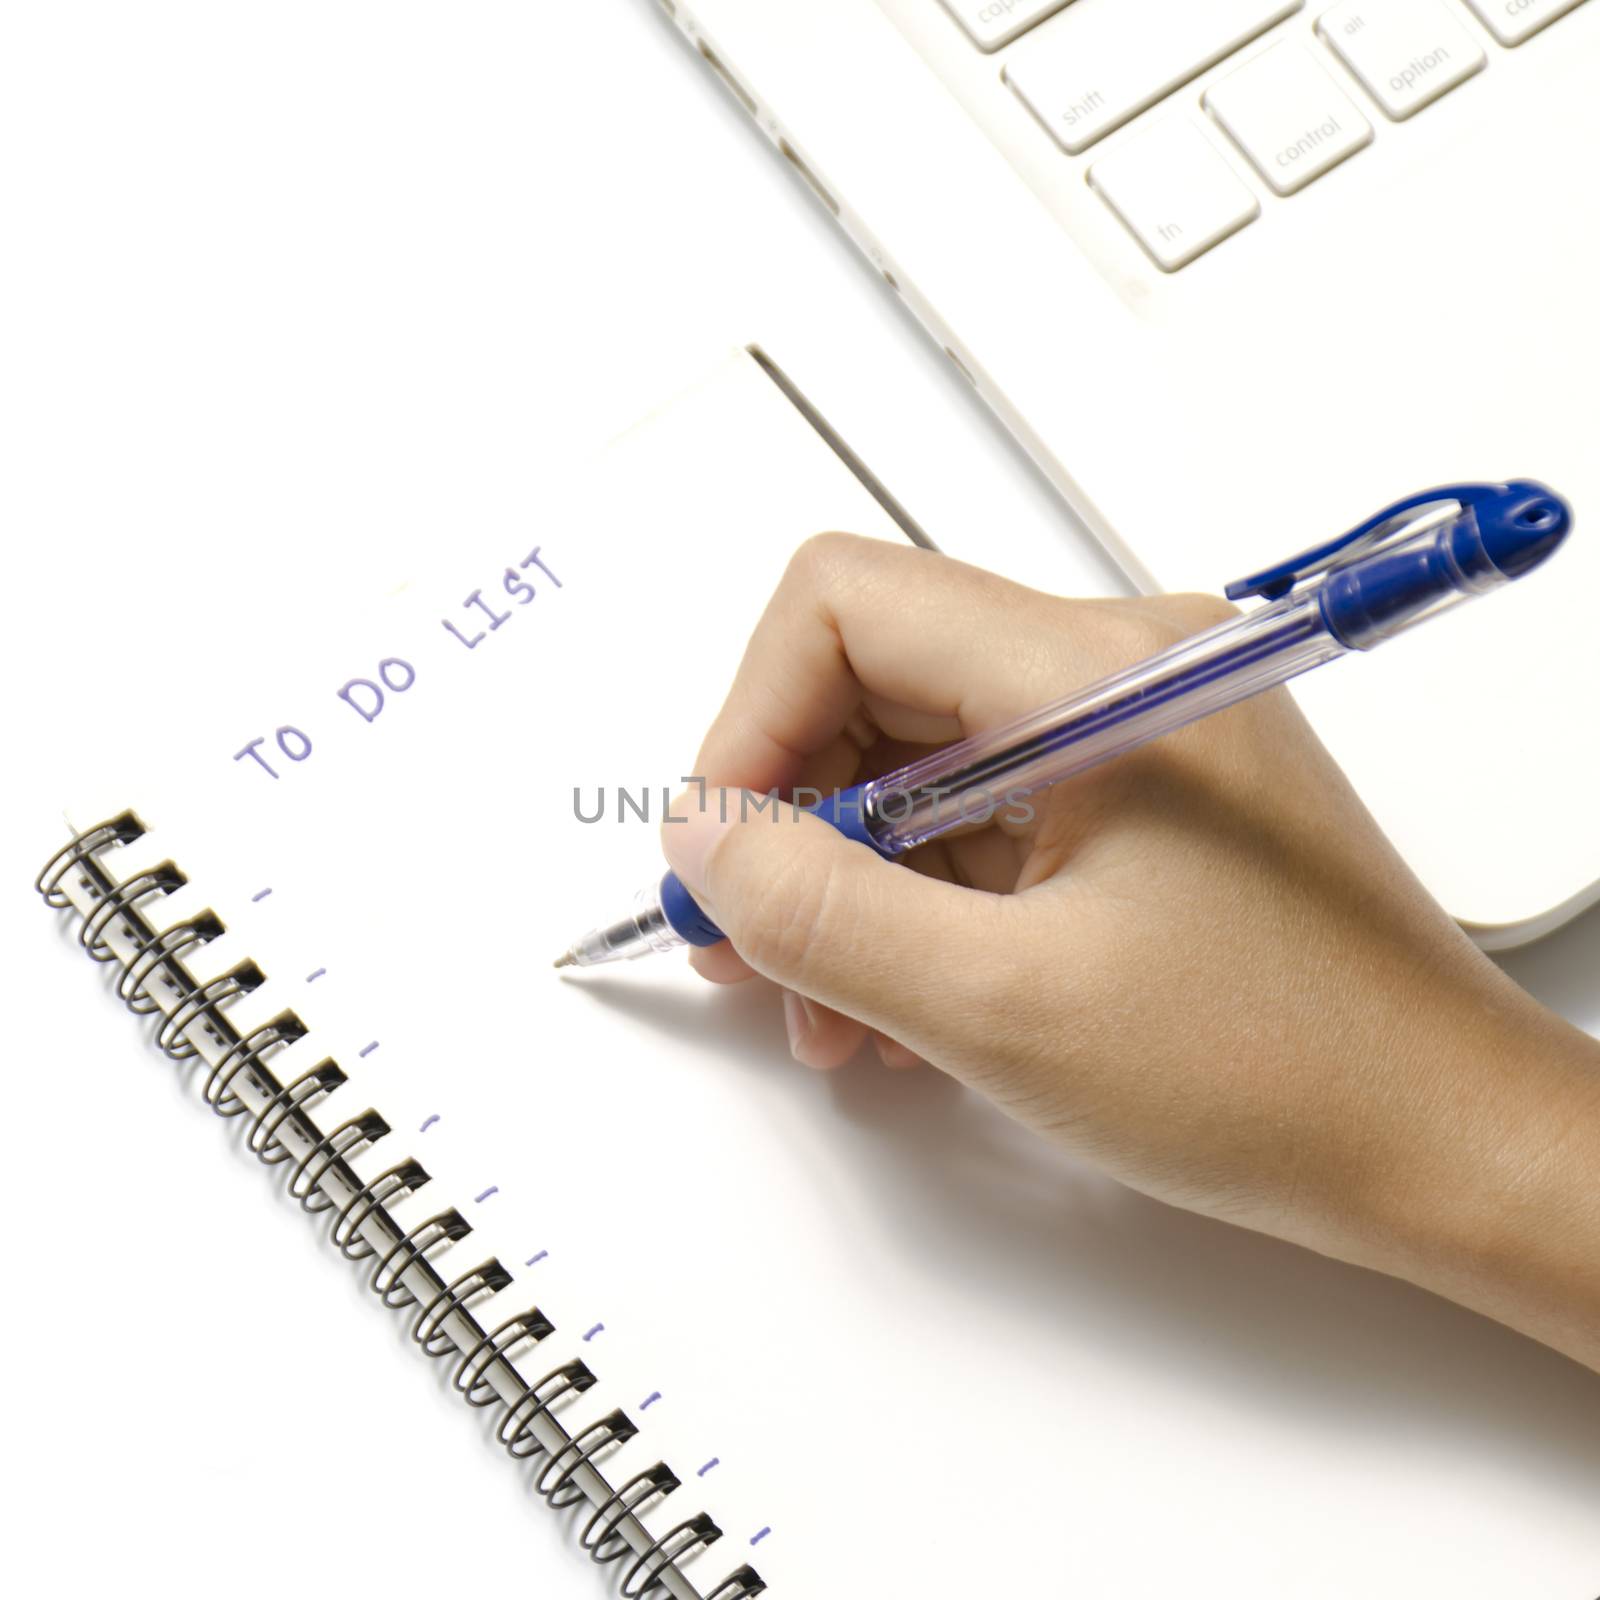 woman hand writing with pen on notebook write to do word and laptop over white background